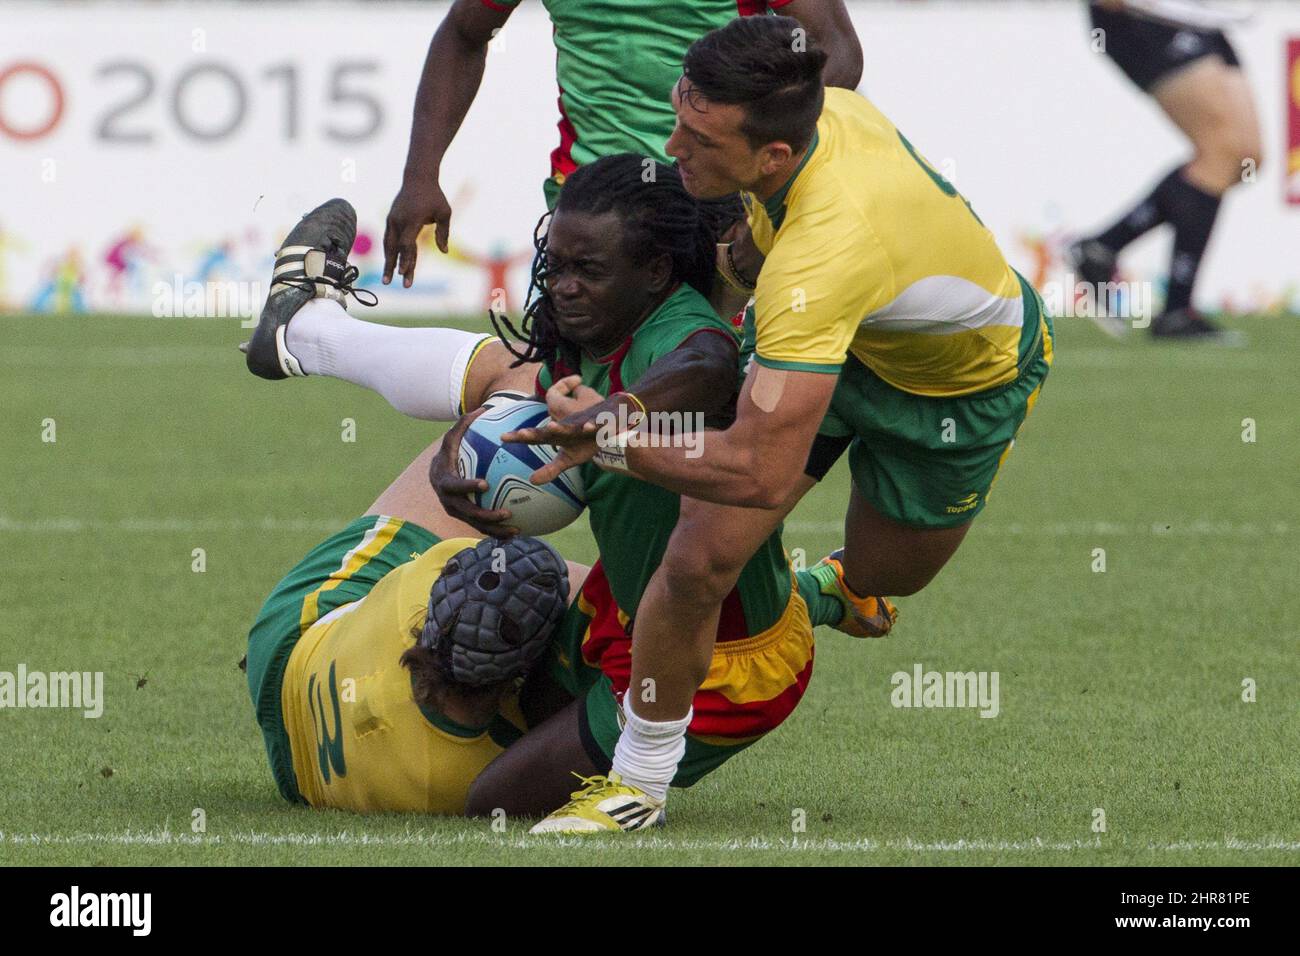 Guyana's Ronald Mayers (centre) is tackled by Brazil's Juliano Ernani Malengreau Fiori (left) and Lucas Domingues during men's rugby sevens at the Pan Am games in Toronto on Saturday July 11. 2015. THE CANADIAN PRESS/Chris Young Stock Photo